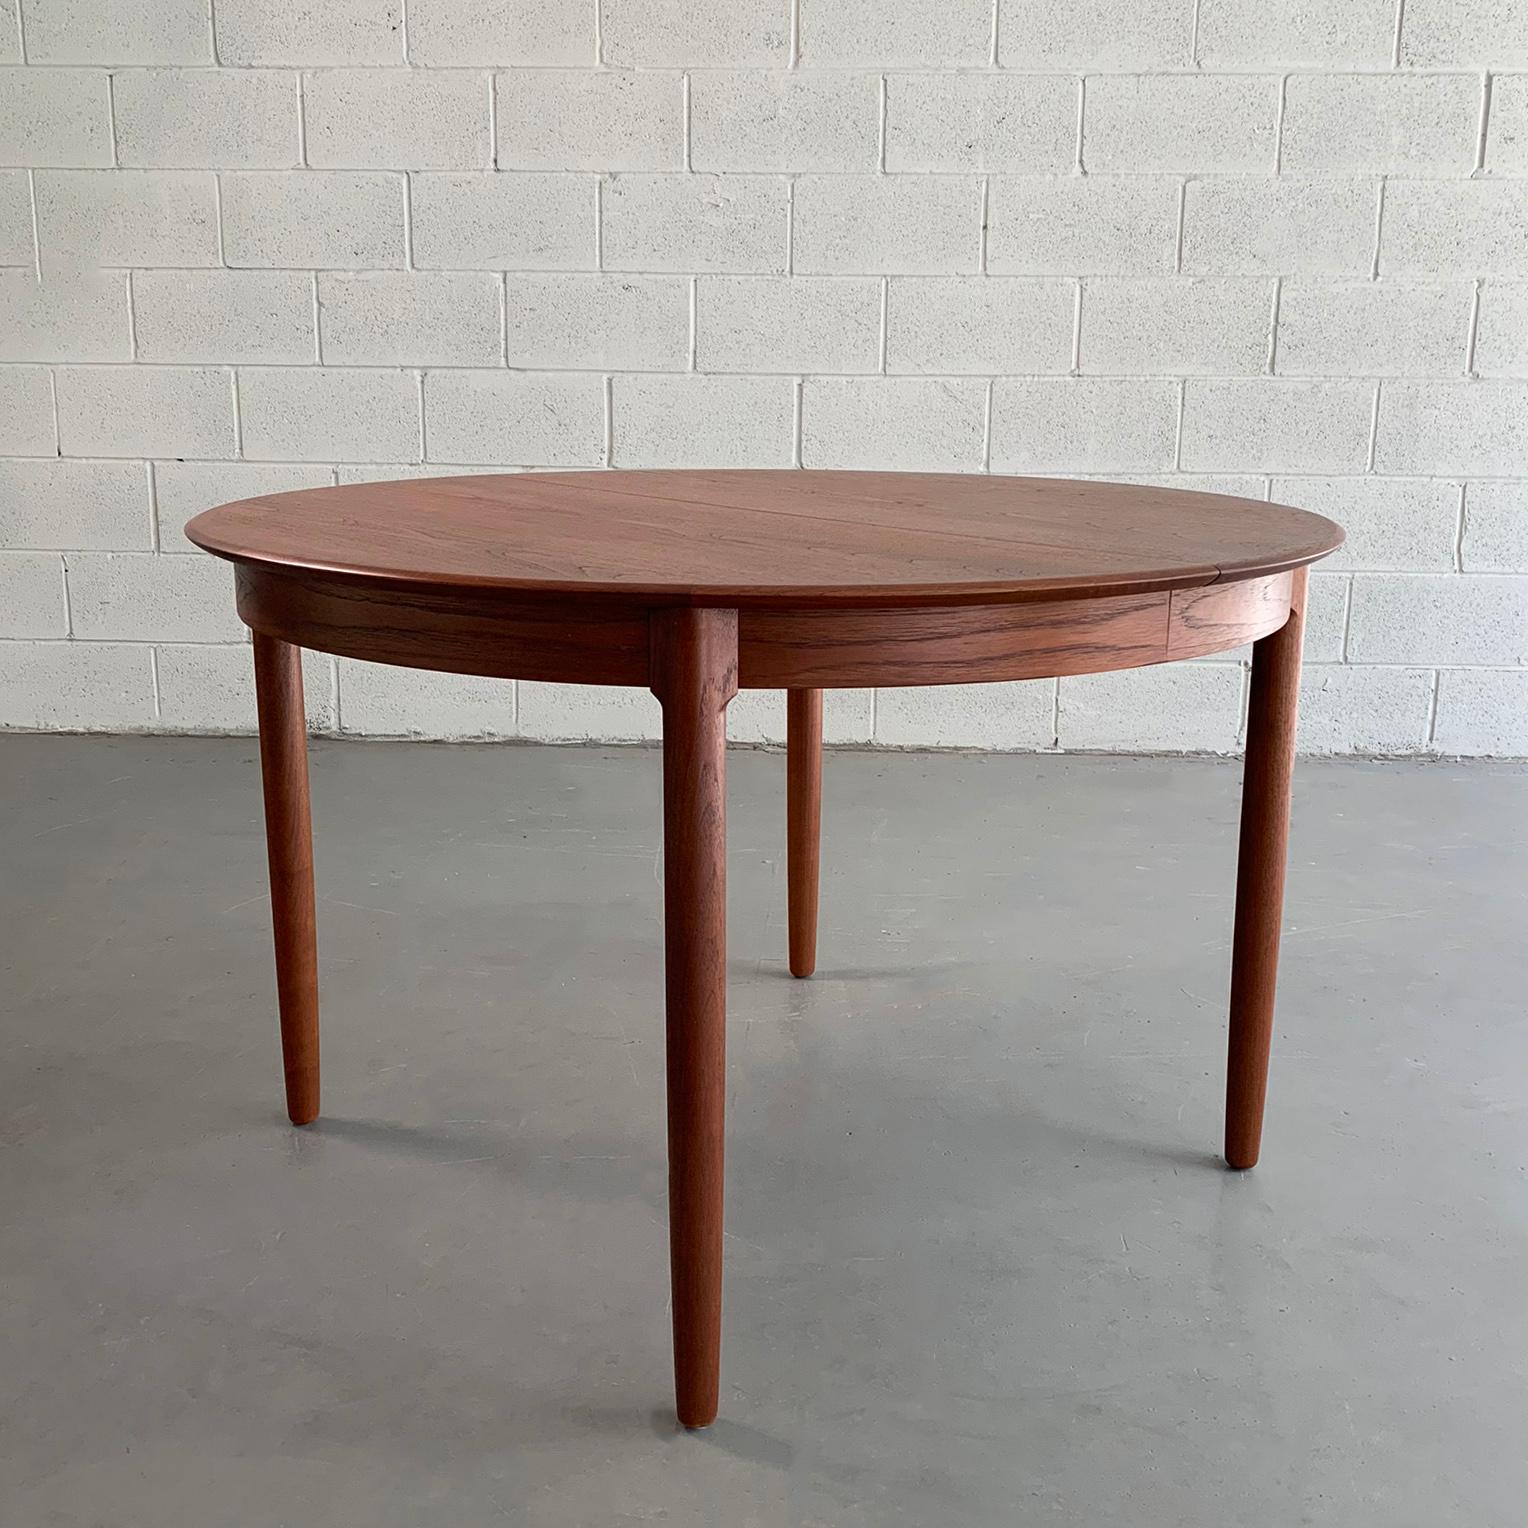 Beautifully detailed, Danish modern, 47 inch round, teak dining table features 2 leaves to extend to 67 inches with one leaf and 86.5 with both leaves to accommodate 8 people.